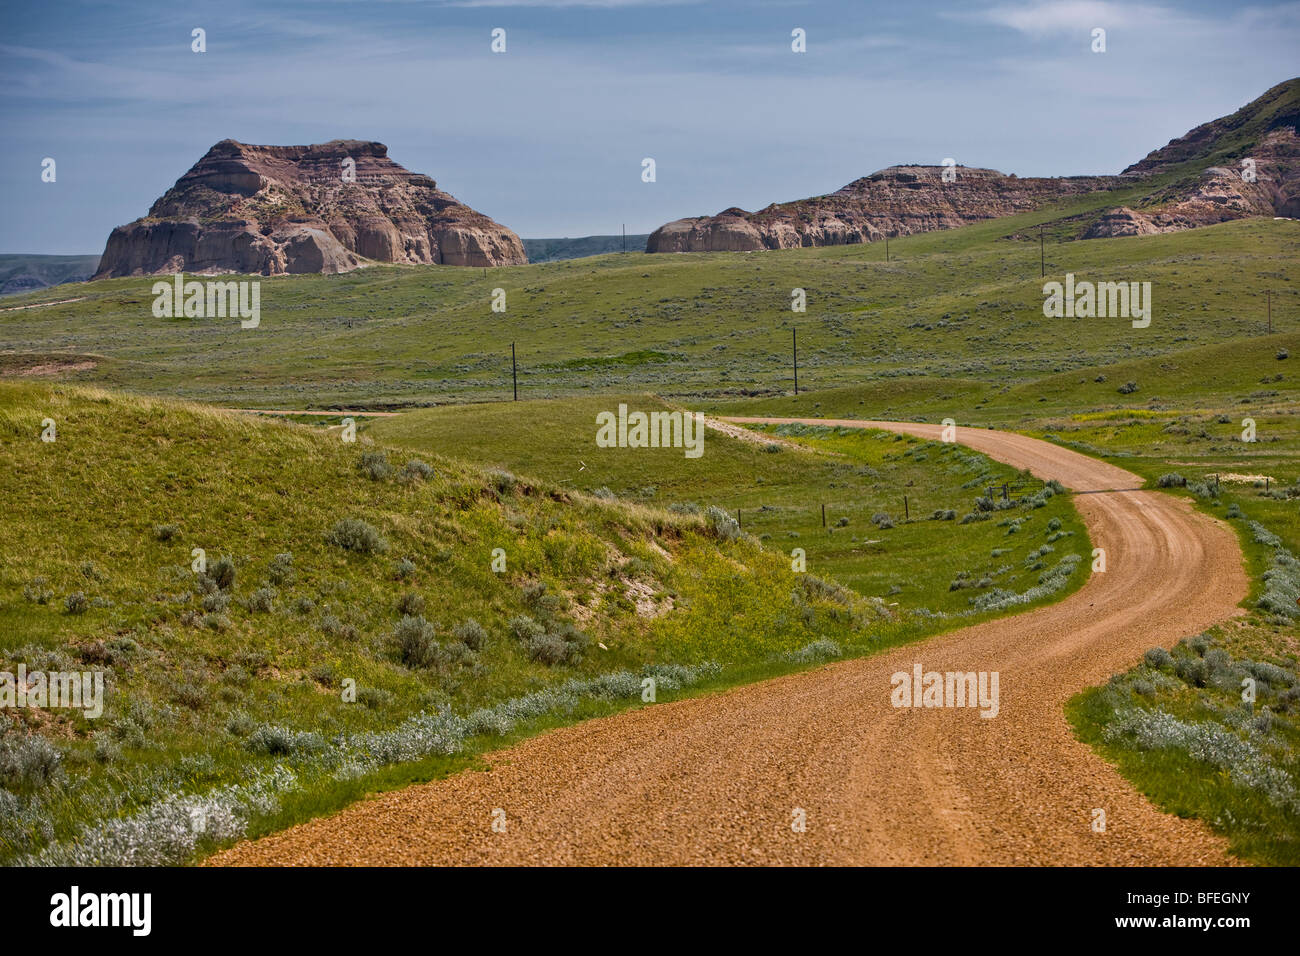 Rural road and Castle Butte in the Big Muddy Badlands of southern Saskatchewan, Canada Stock Photo